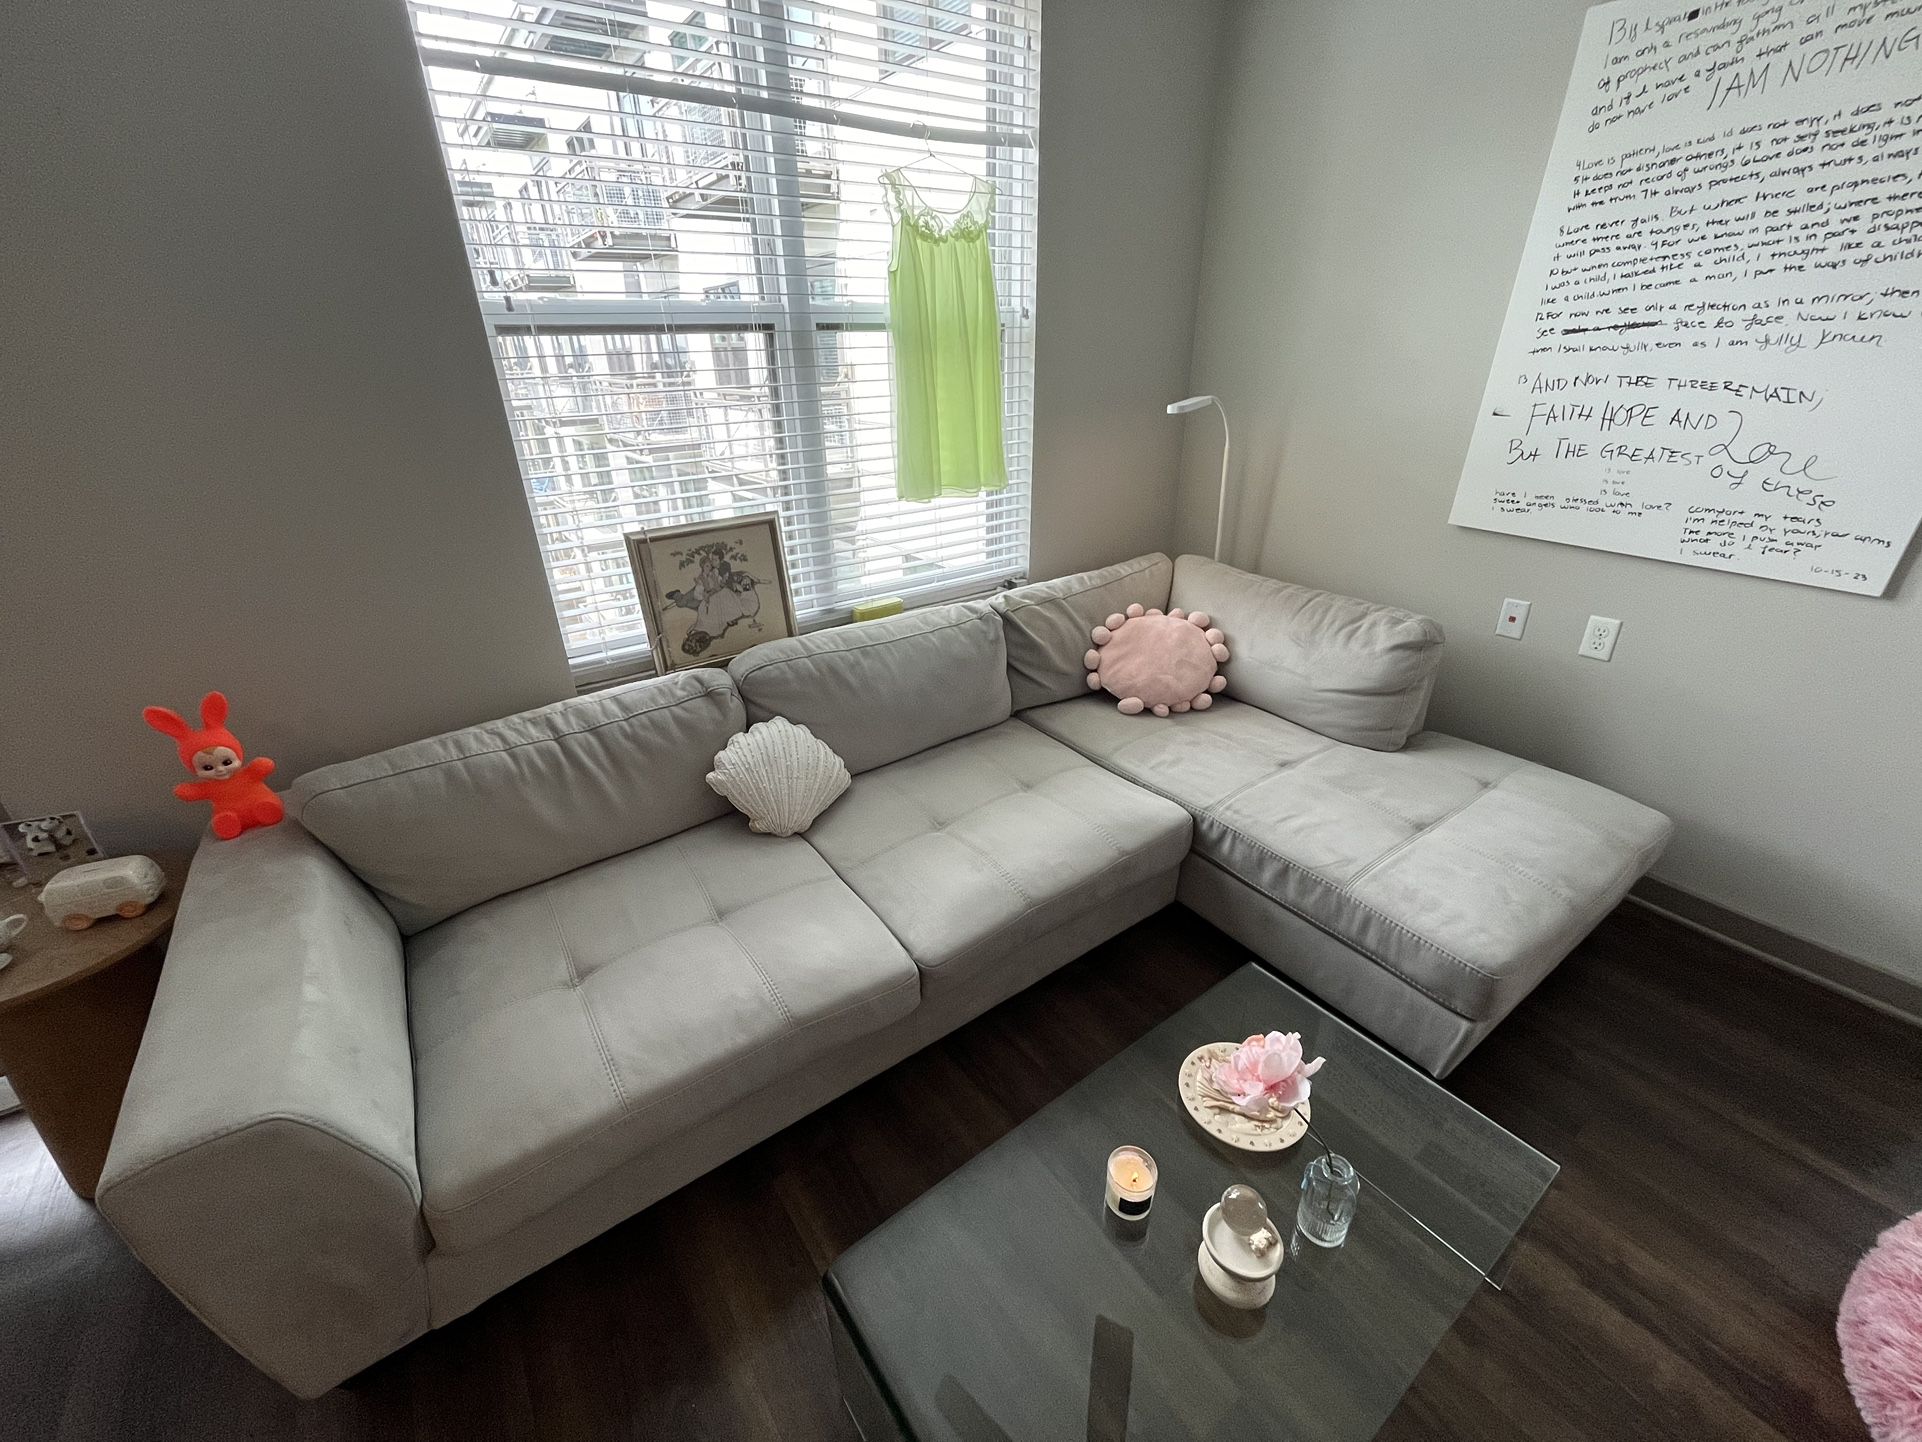 L SHAPE COUCH- City Furniture 